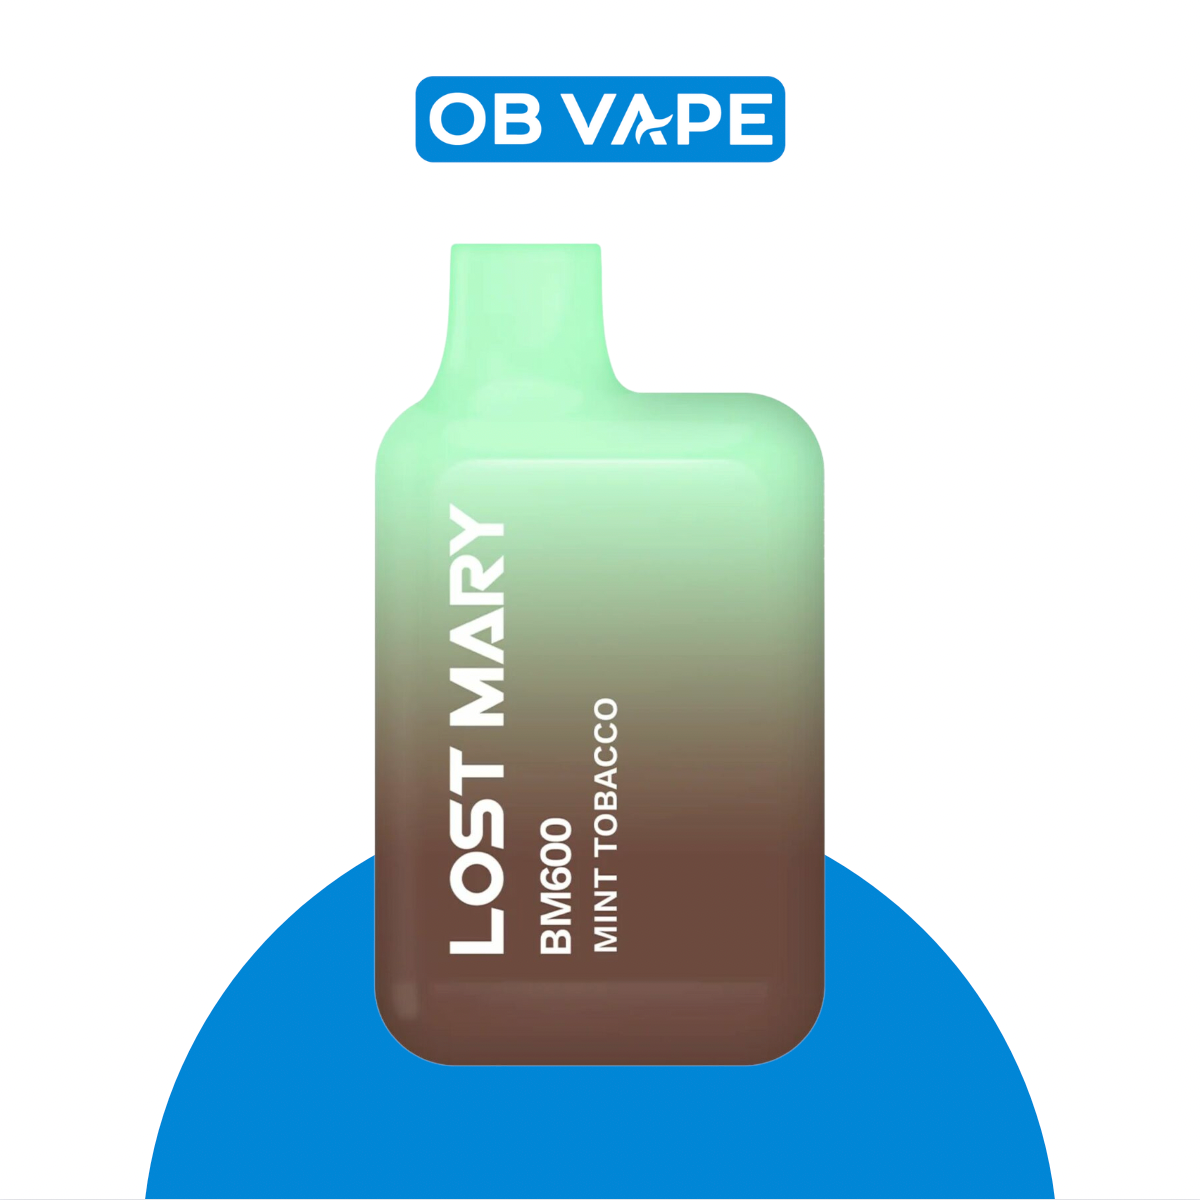 Mint Tobacco - Lost Mary ELF Bar BM600 Disposable Vape - OB Vape Shop Ireland | Free Next Day Delivery Over €50 | OB Vape Ireland's Premier Vape Shop | IVG 2400, Lost Mary, Elfliq, Disposable Vape